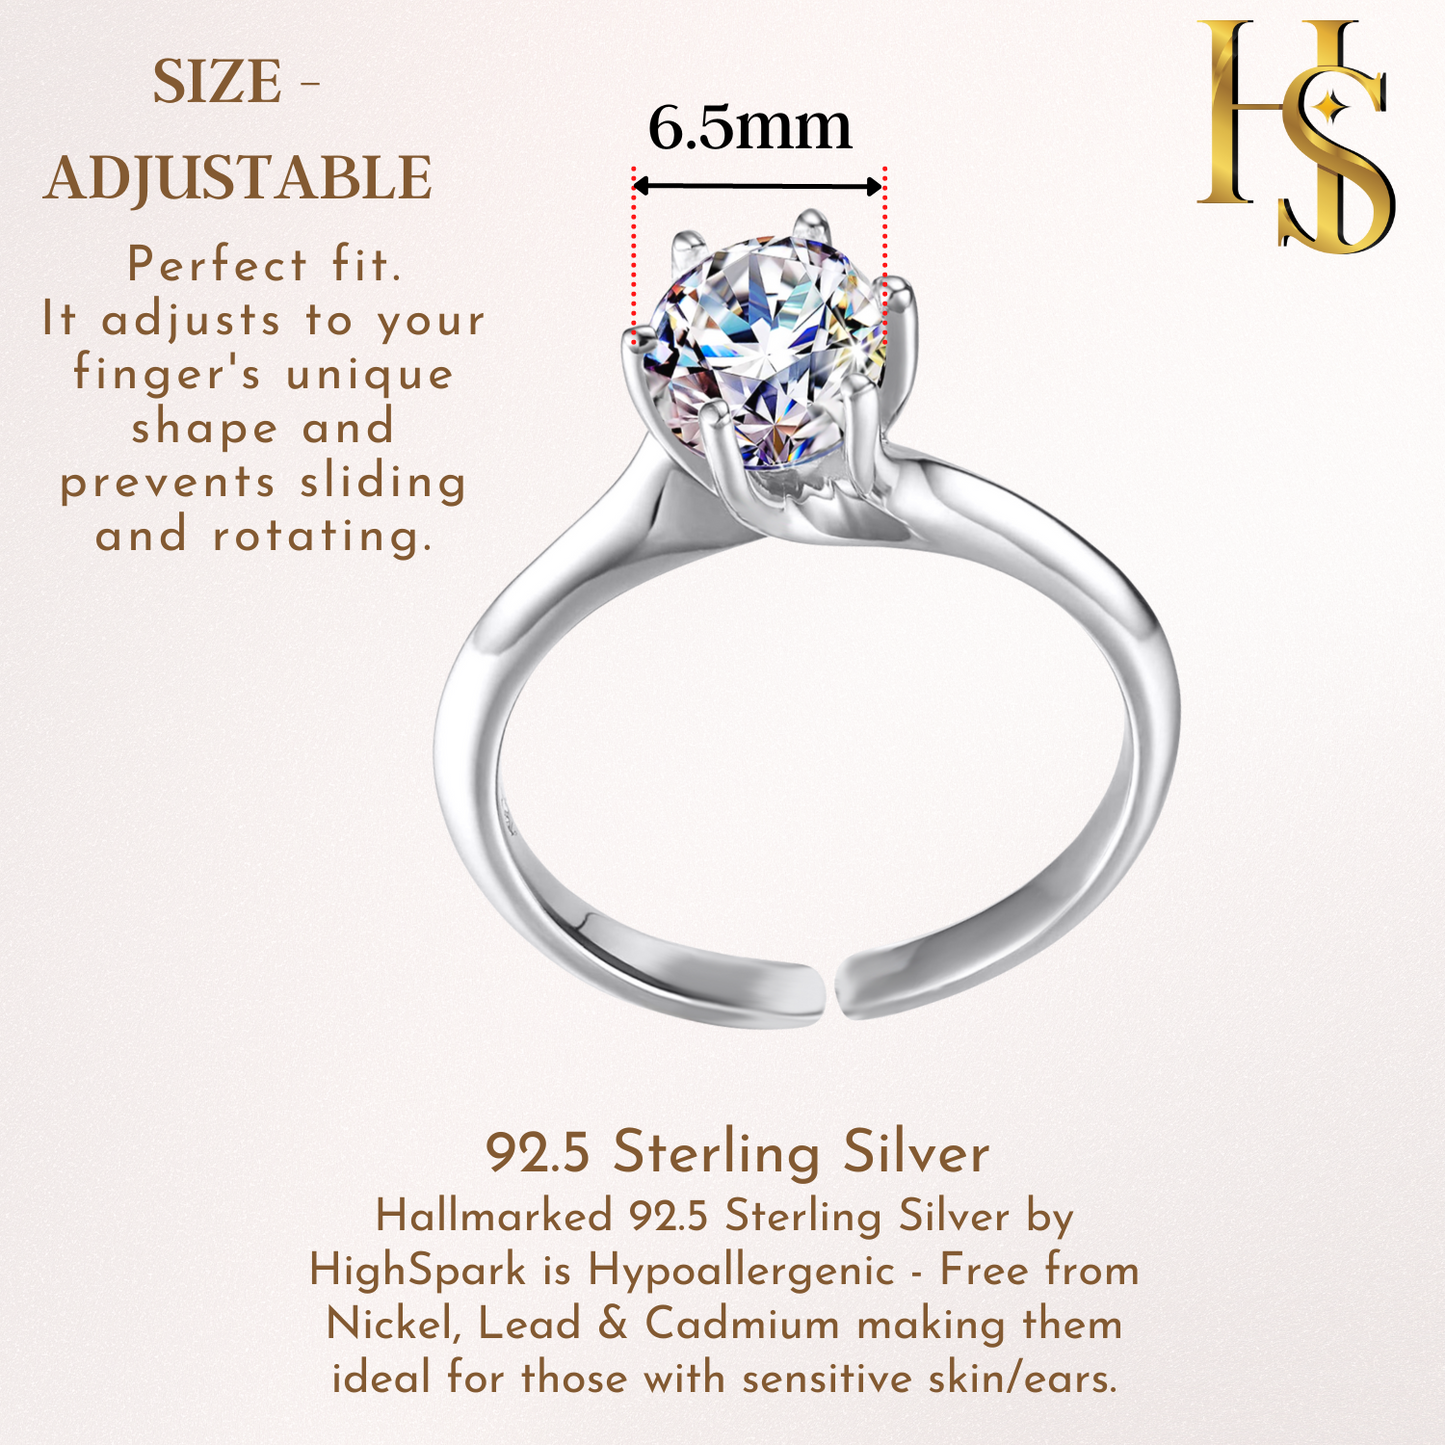 Solitaire Adjustable Ring 'Sparkling Martini' for women in 92.5 Silver